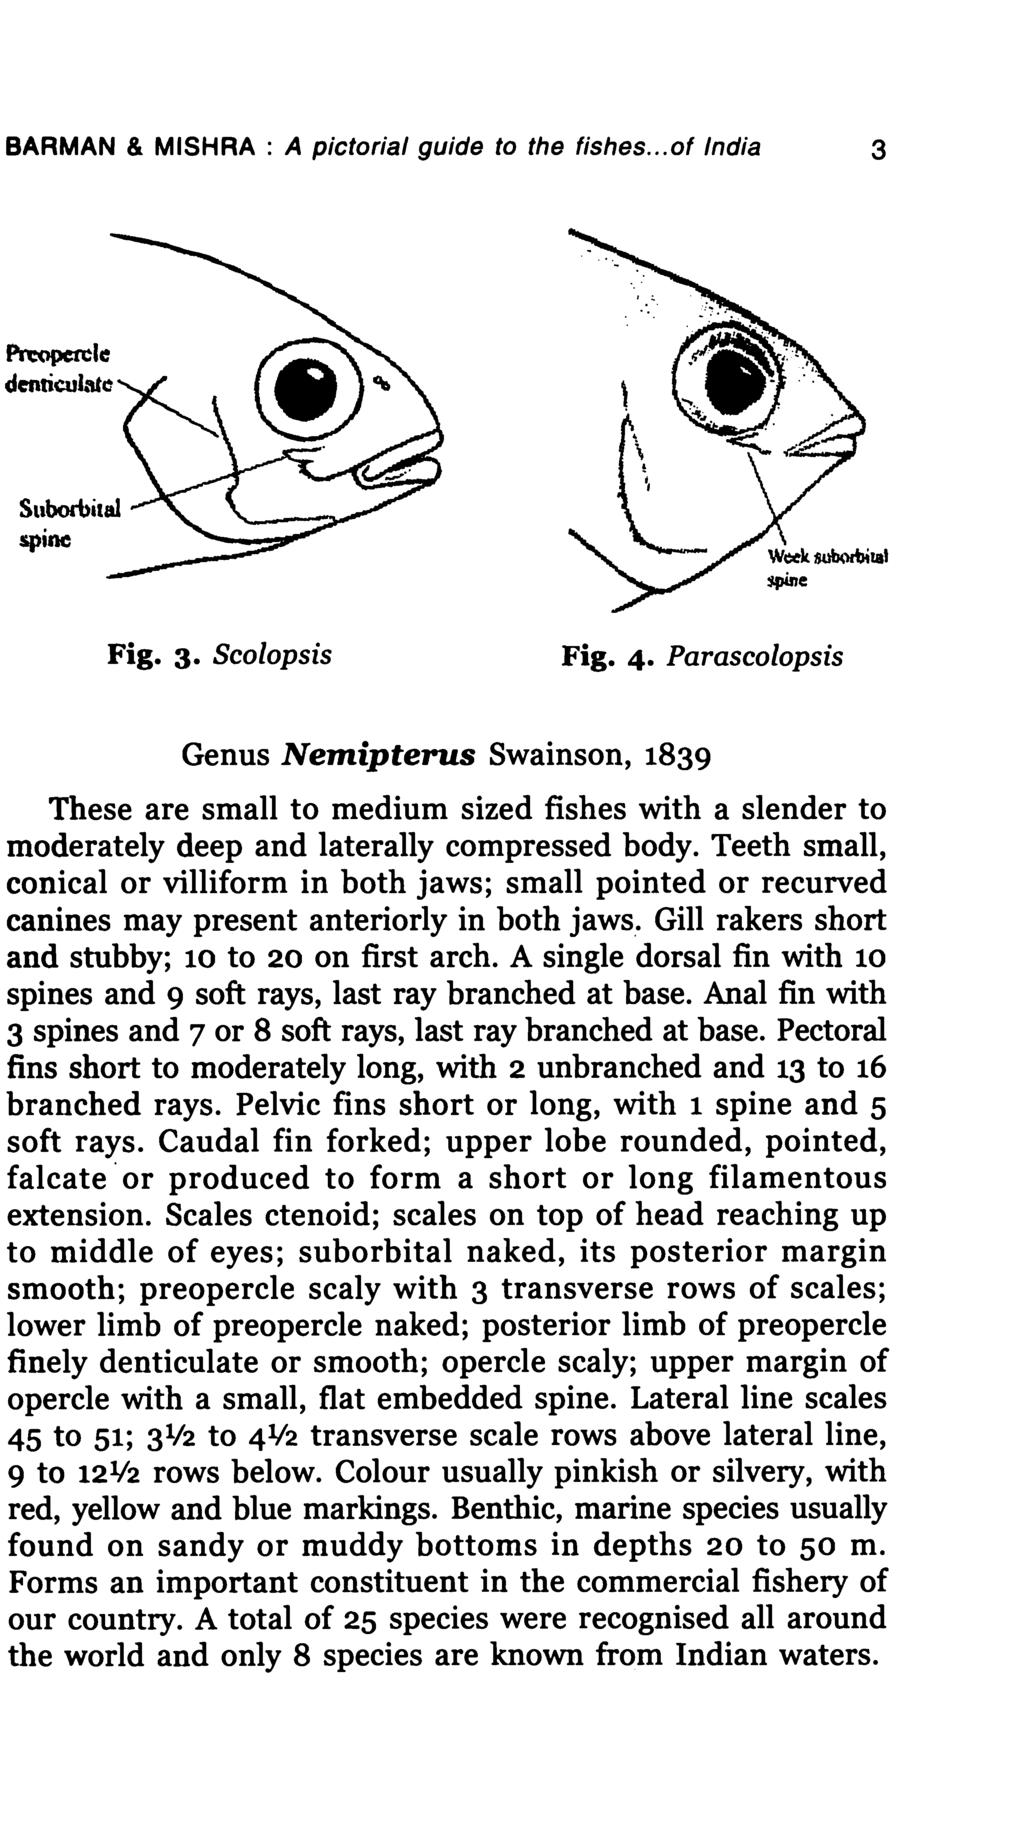 BARMAN & MISHRA : A pictorial guide to the fishes... of India 3 ~Ie denriwl-u" spine Fig. 3. Seolopsis Fig. 4.